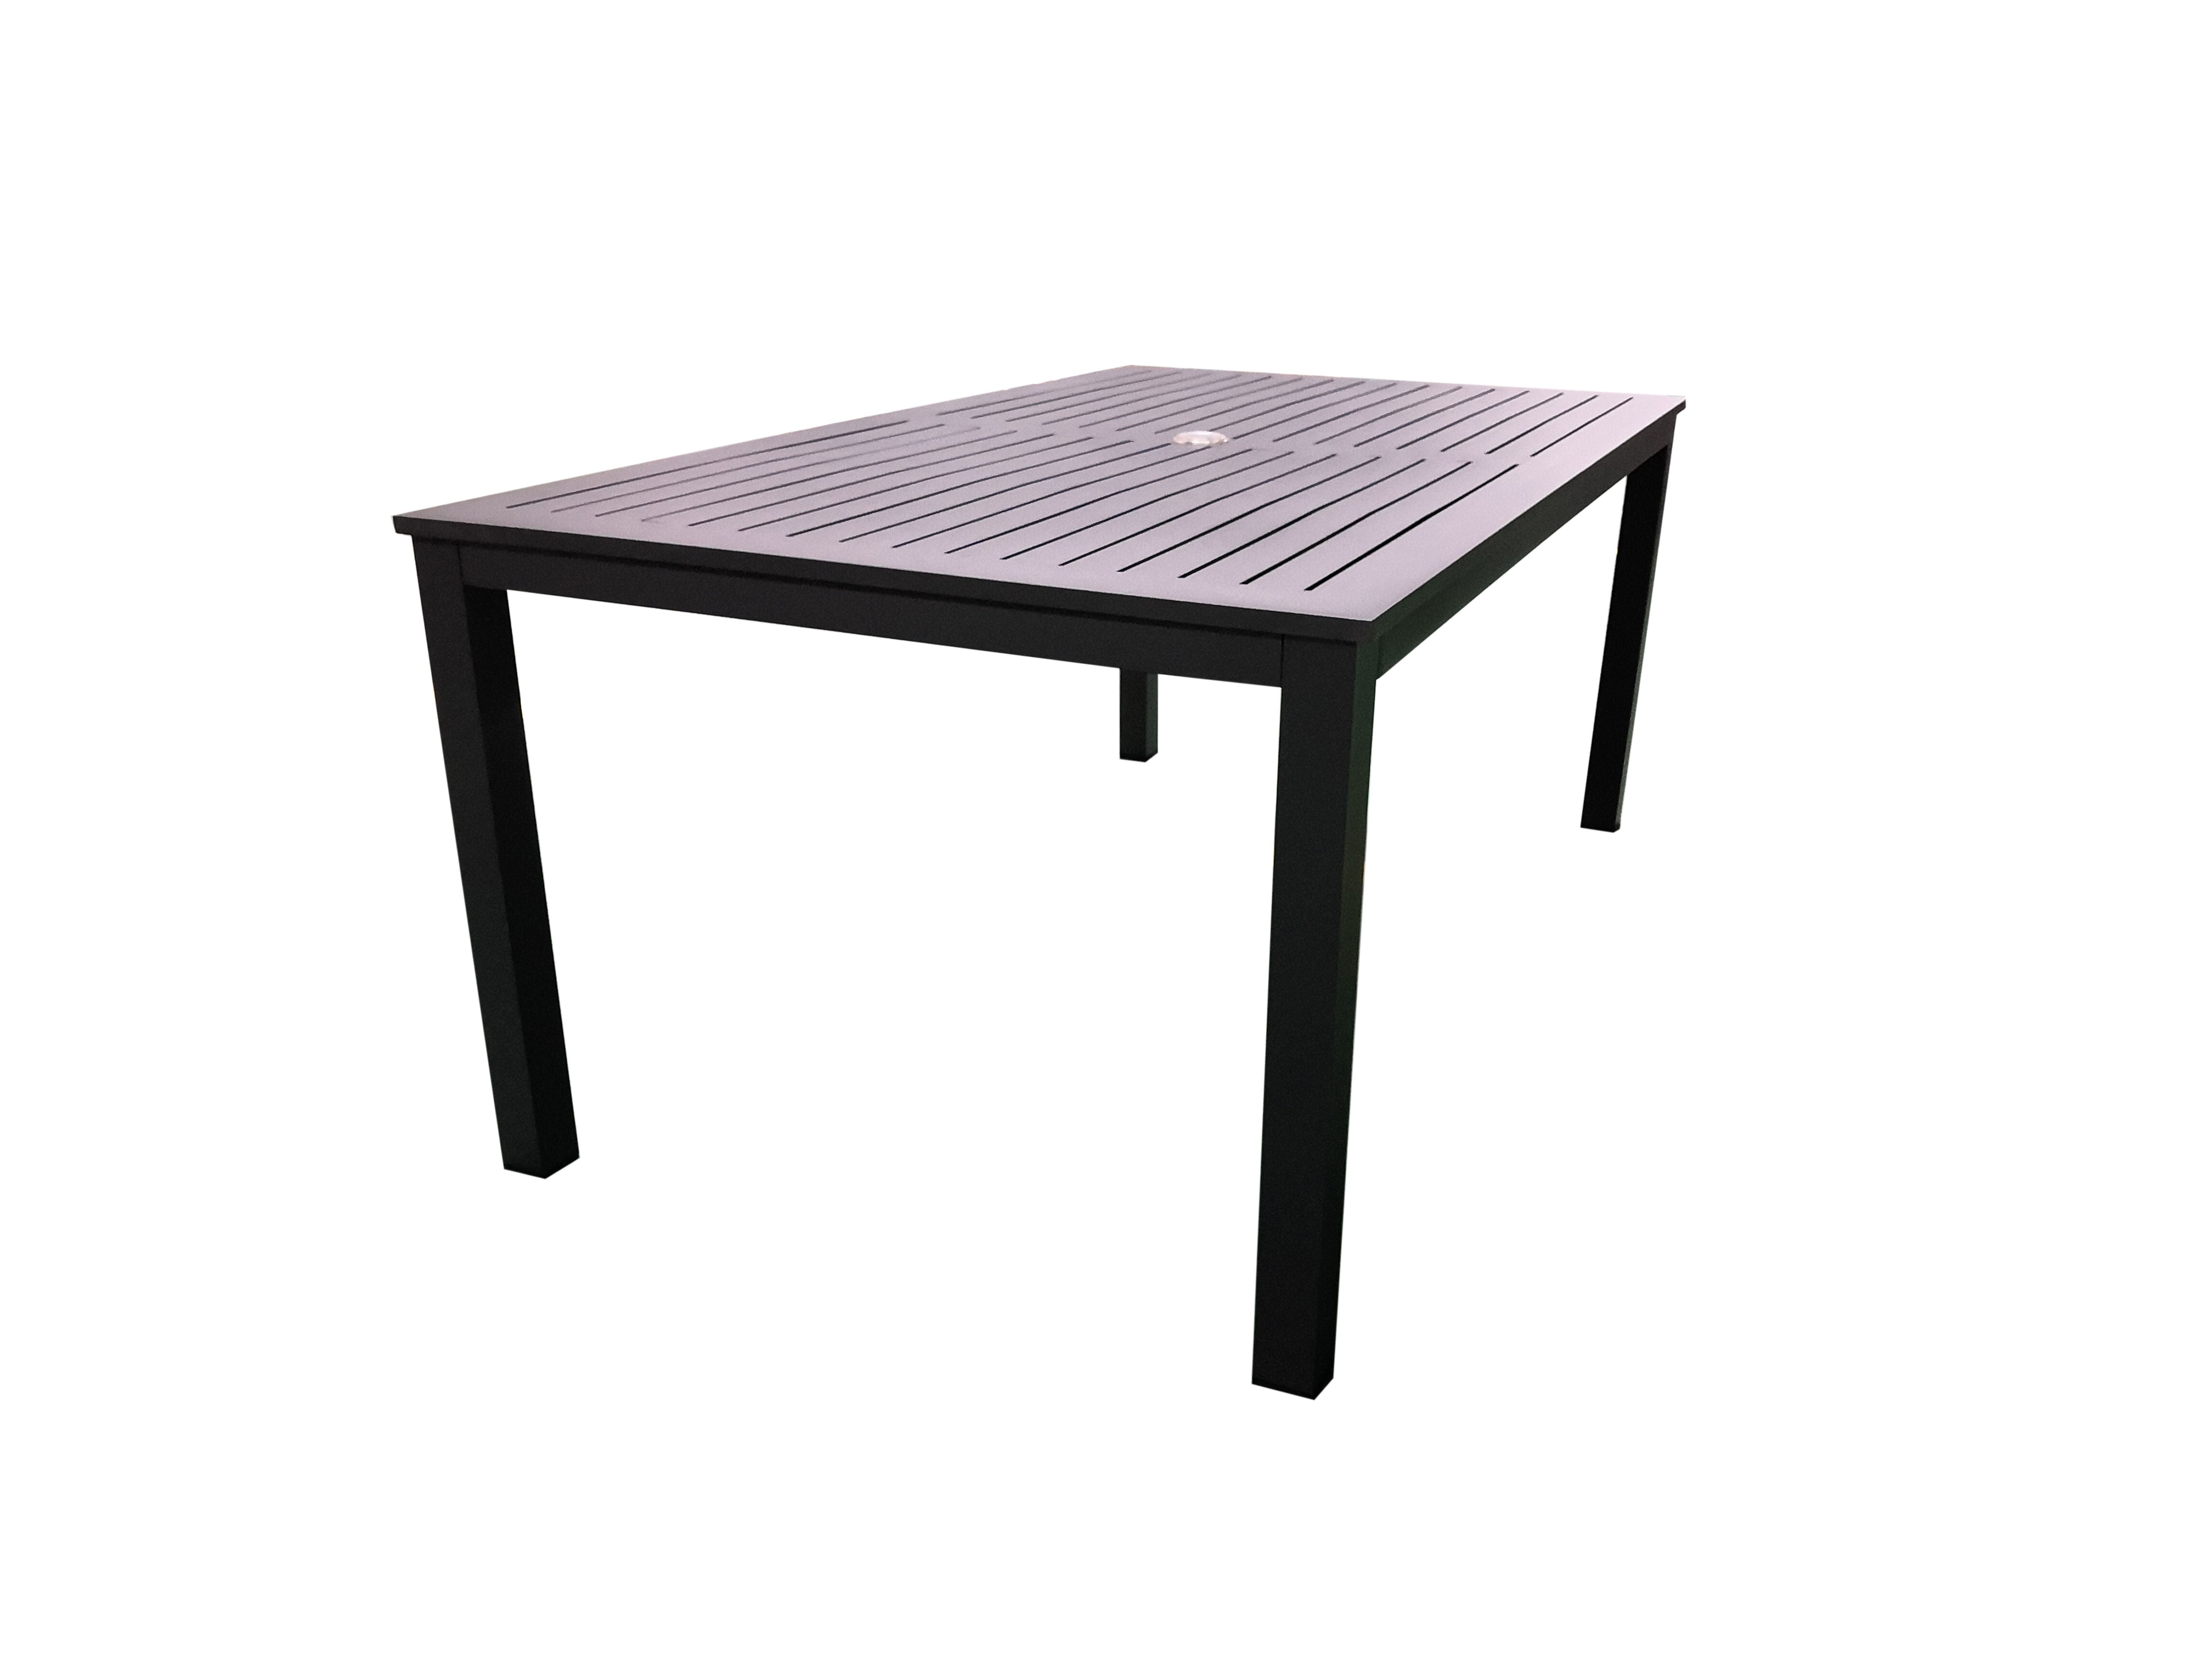 PatioZone Dining Table with Slated Tabletop w/Umbrella Hole in Middle and Aluminum Frame (MOSS-T297C) - Matte Charcoal